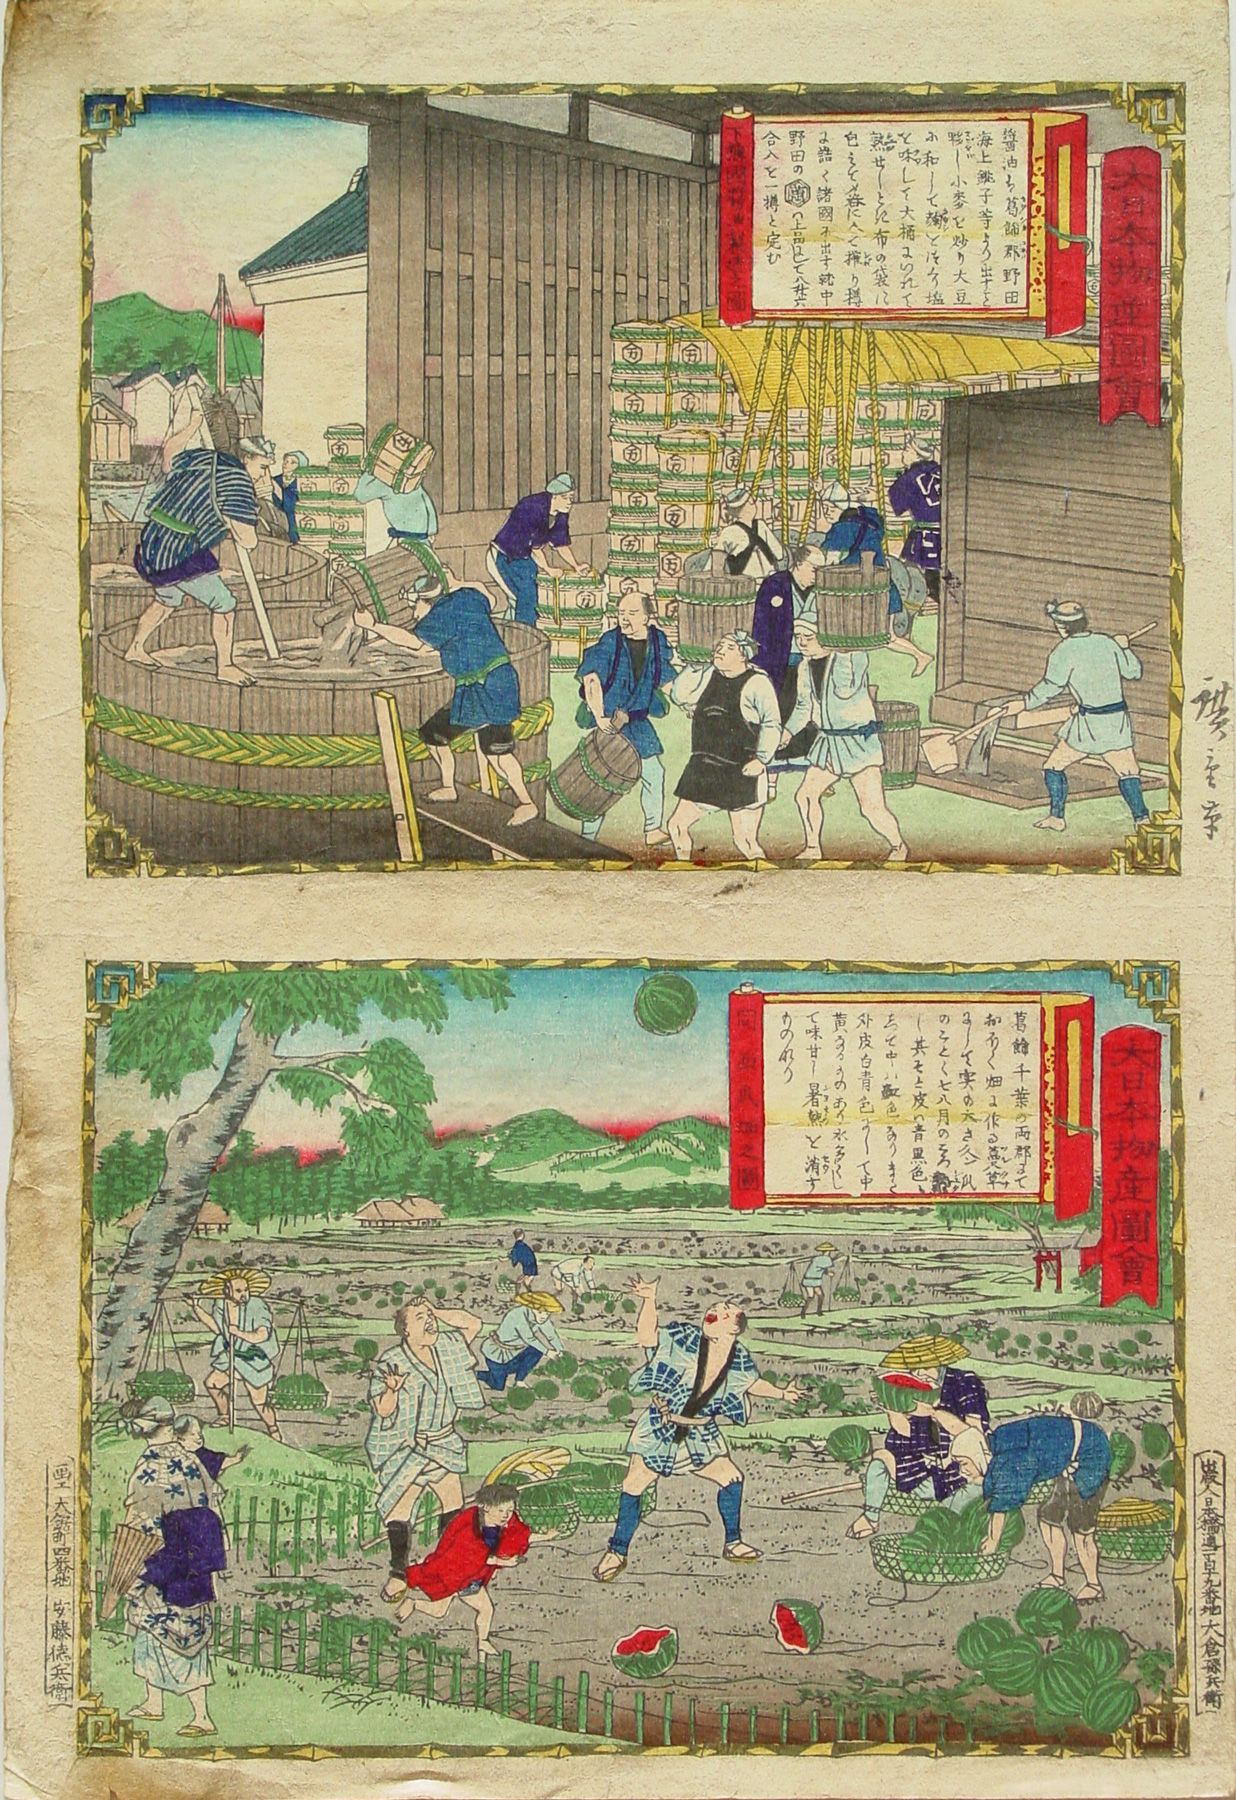 Producing Soy Sauce and Watermelon Field in Shimōsa Province from the series Dai Nippon Bussan Zue (Products of Greater Japan)